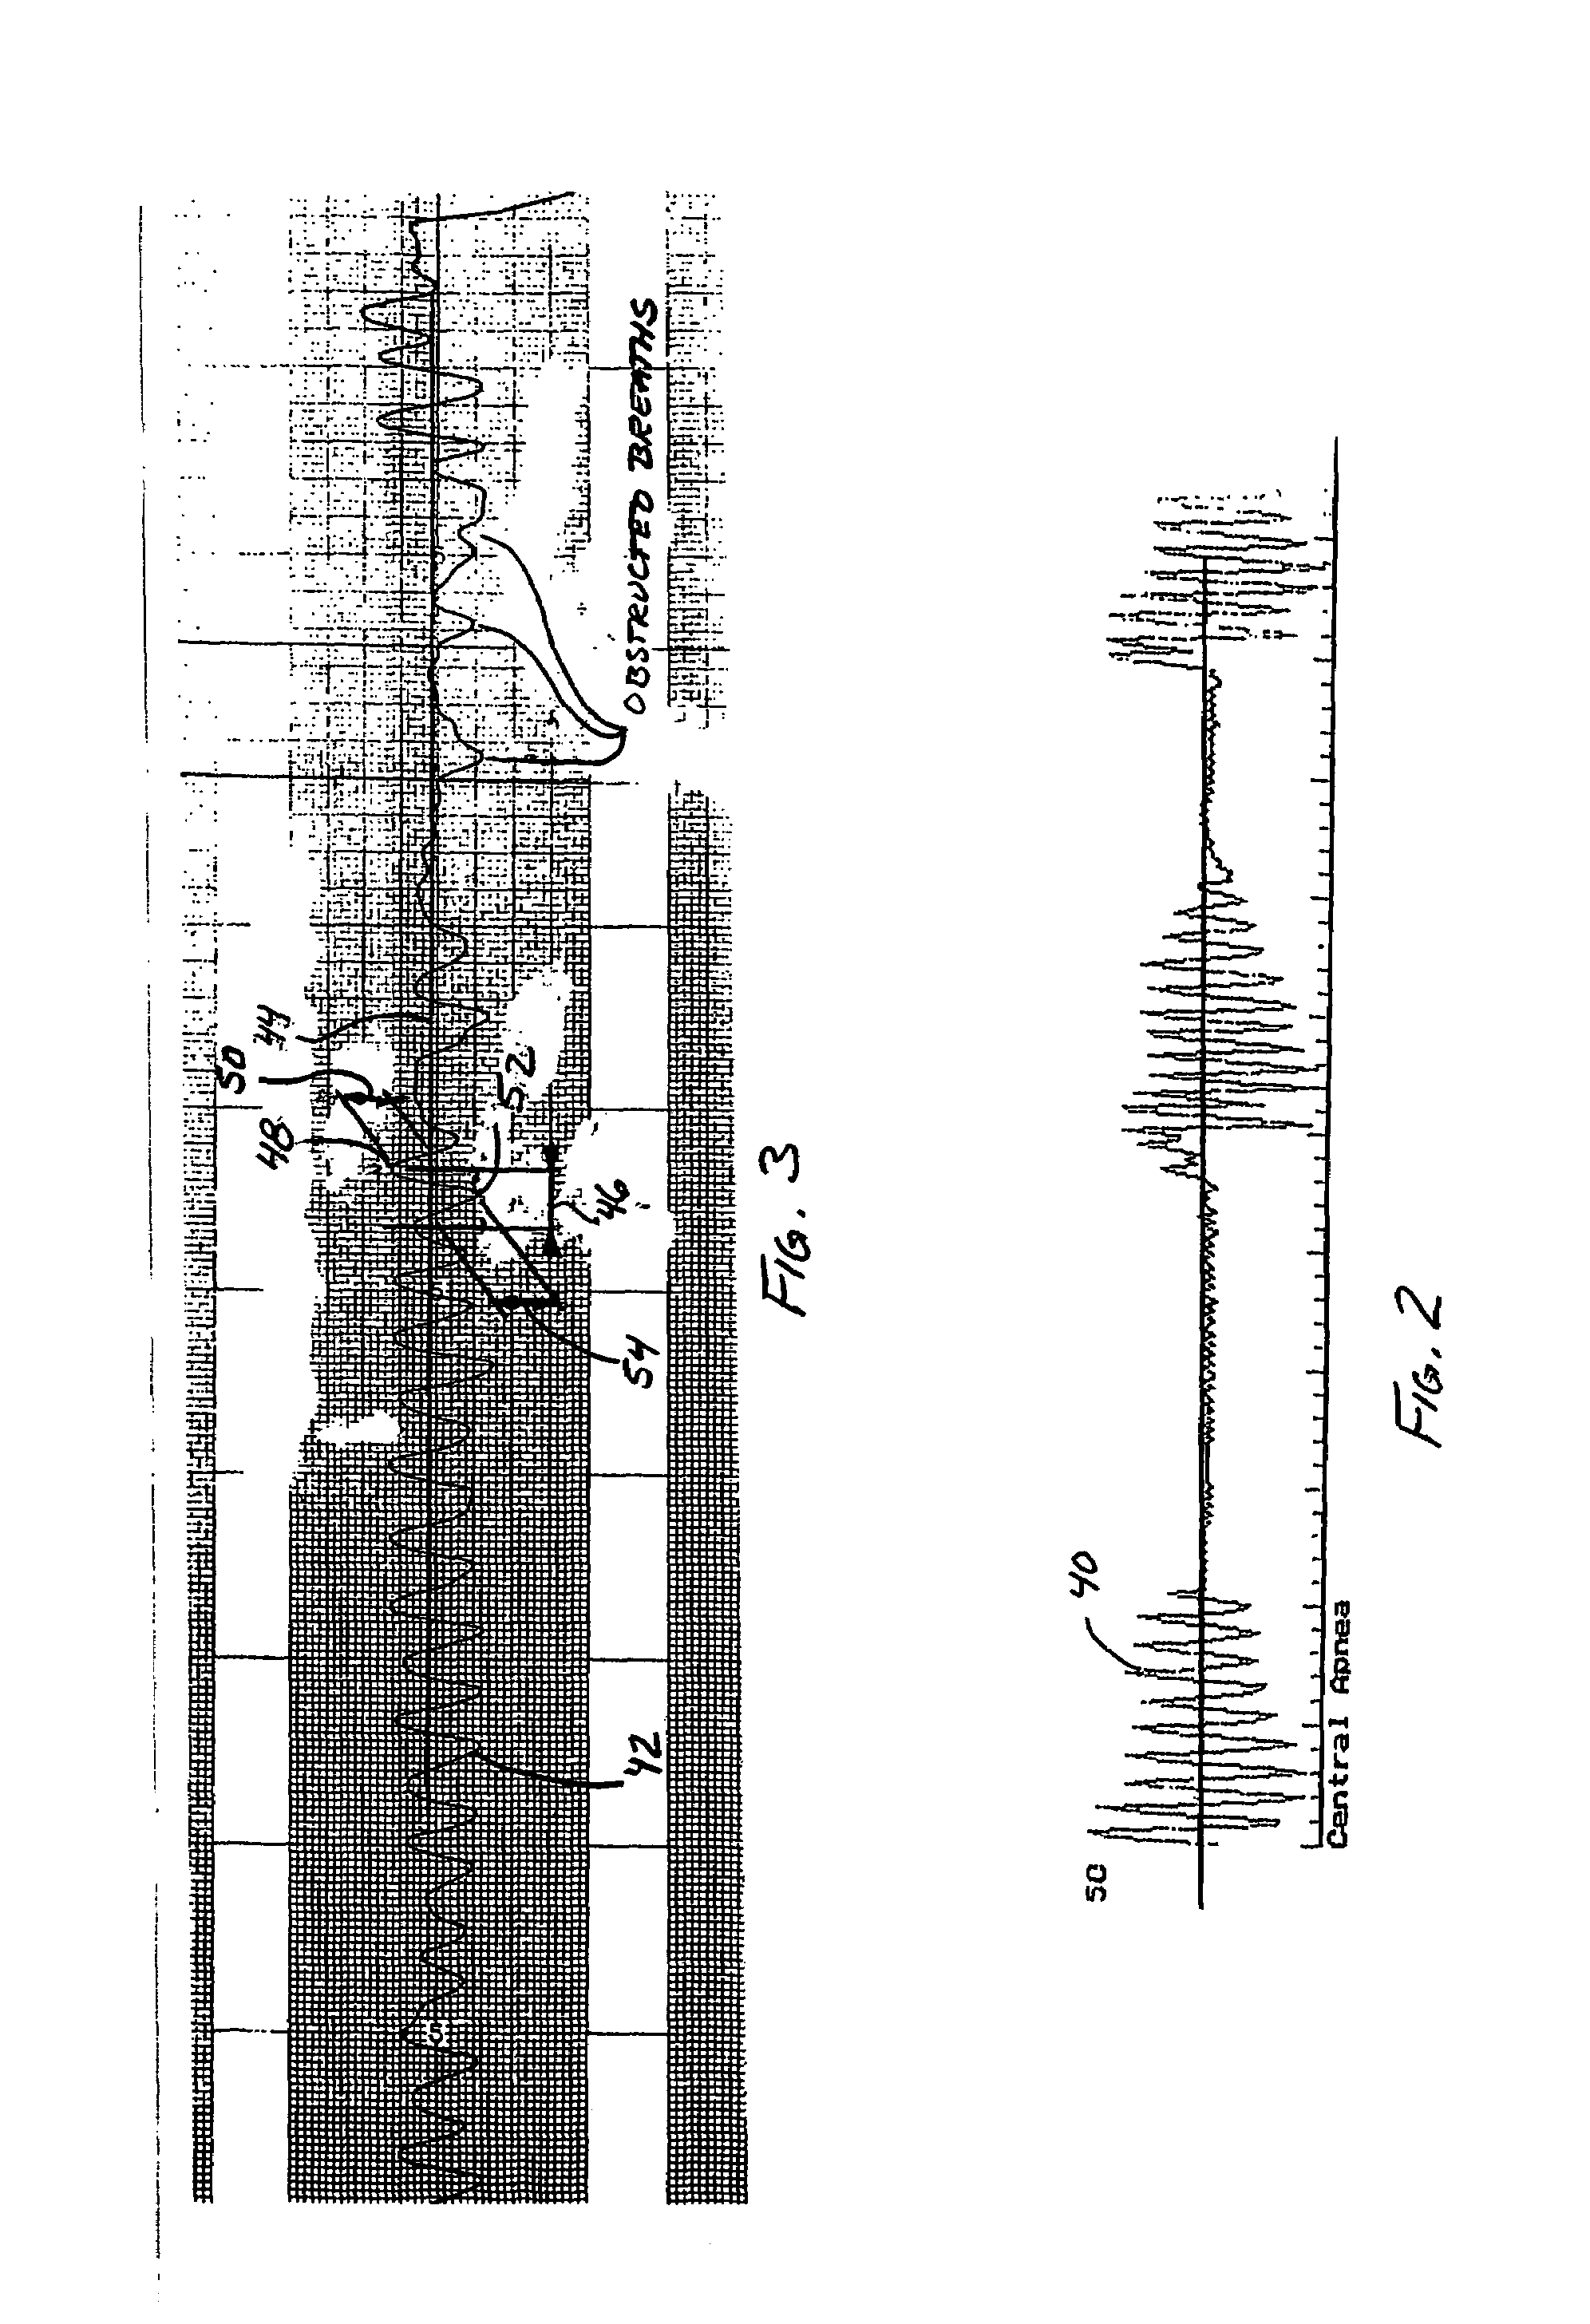 Method for determining airway obstruction